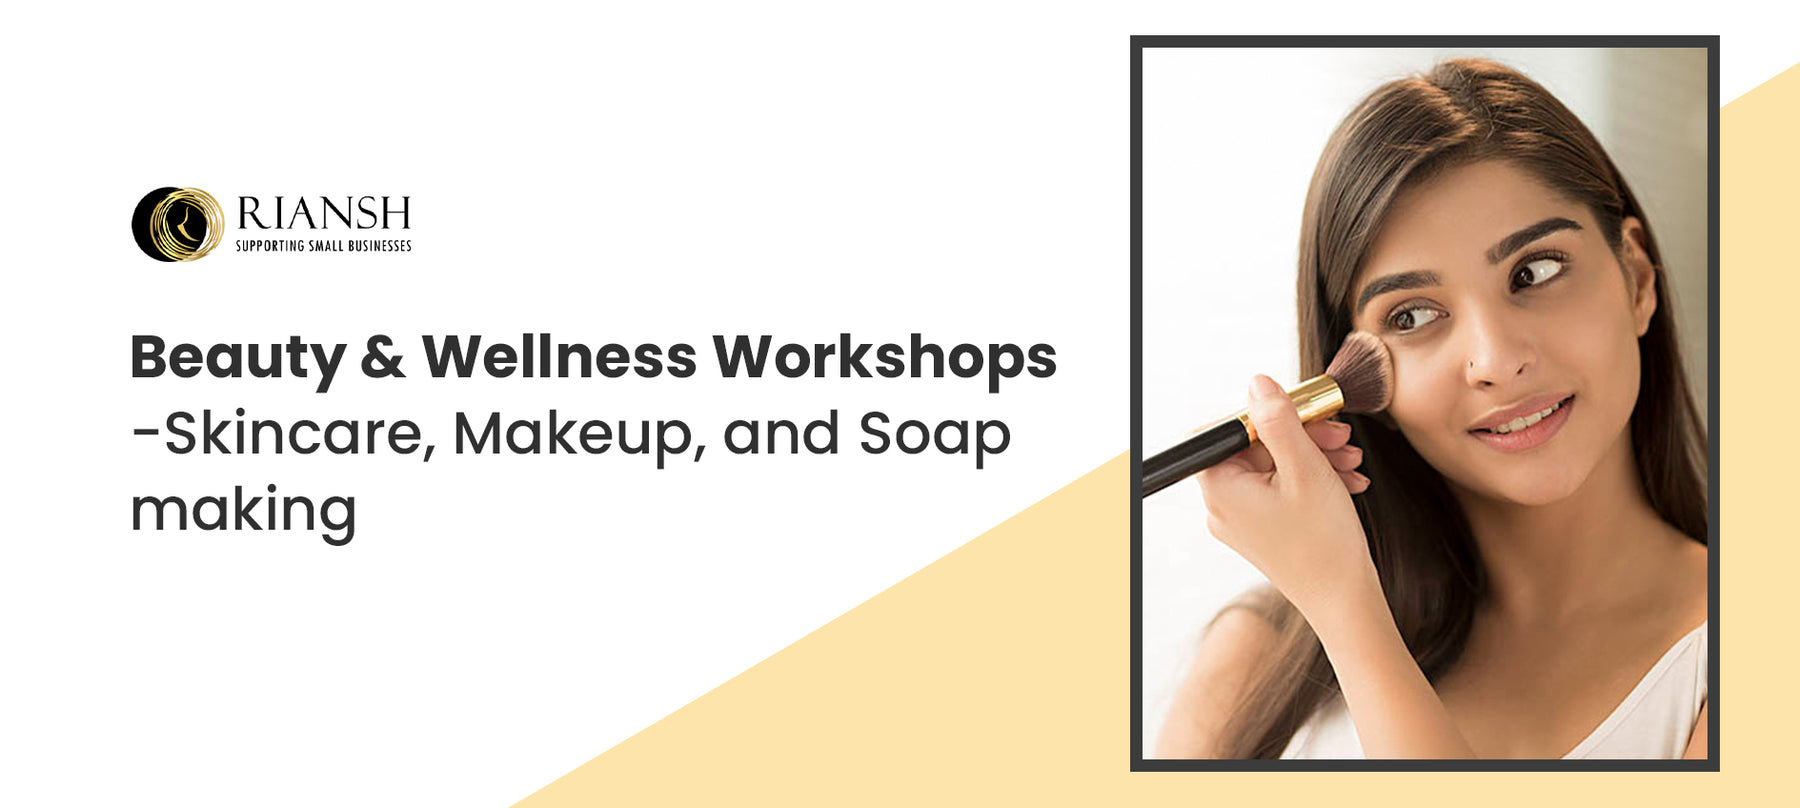 Beauty & Wellness Workshops -Skincare, Makeup, and Soap making